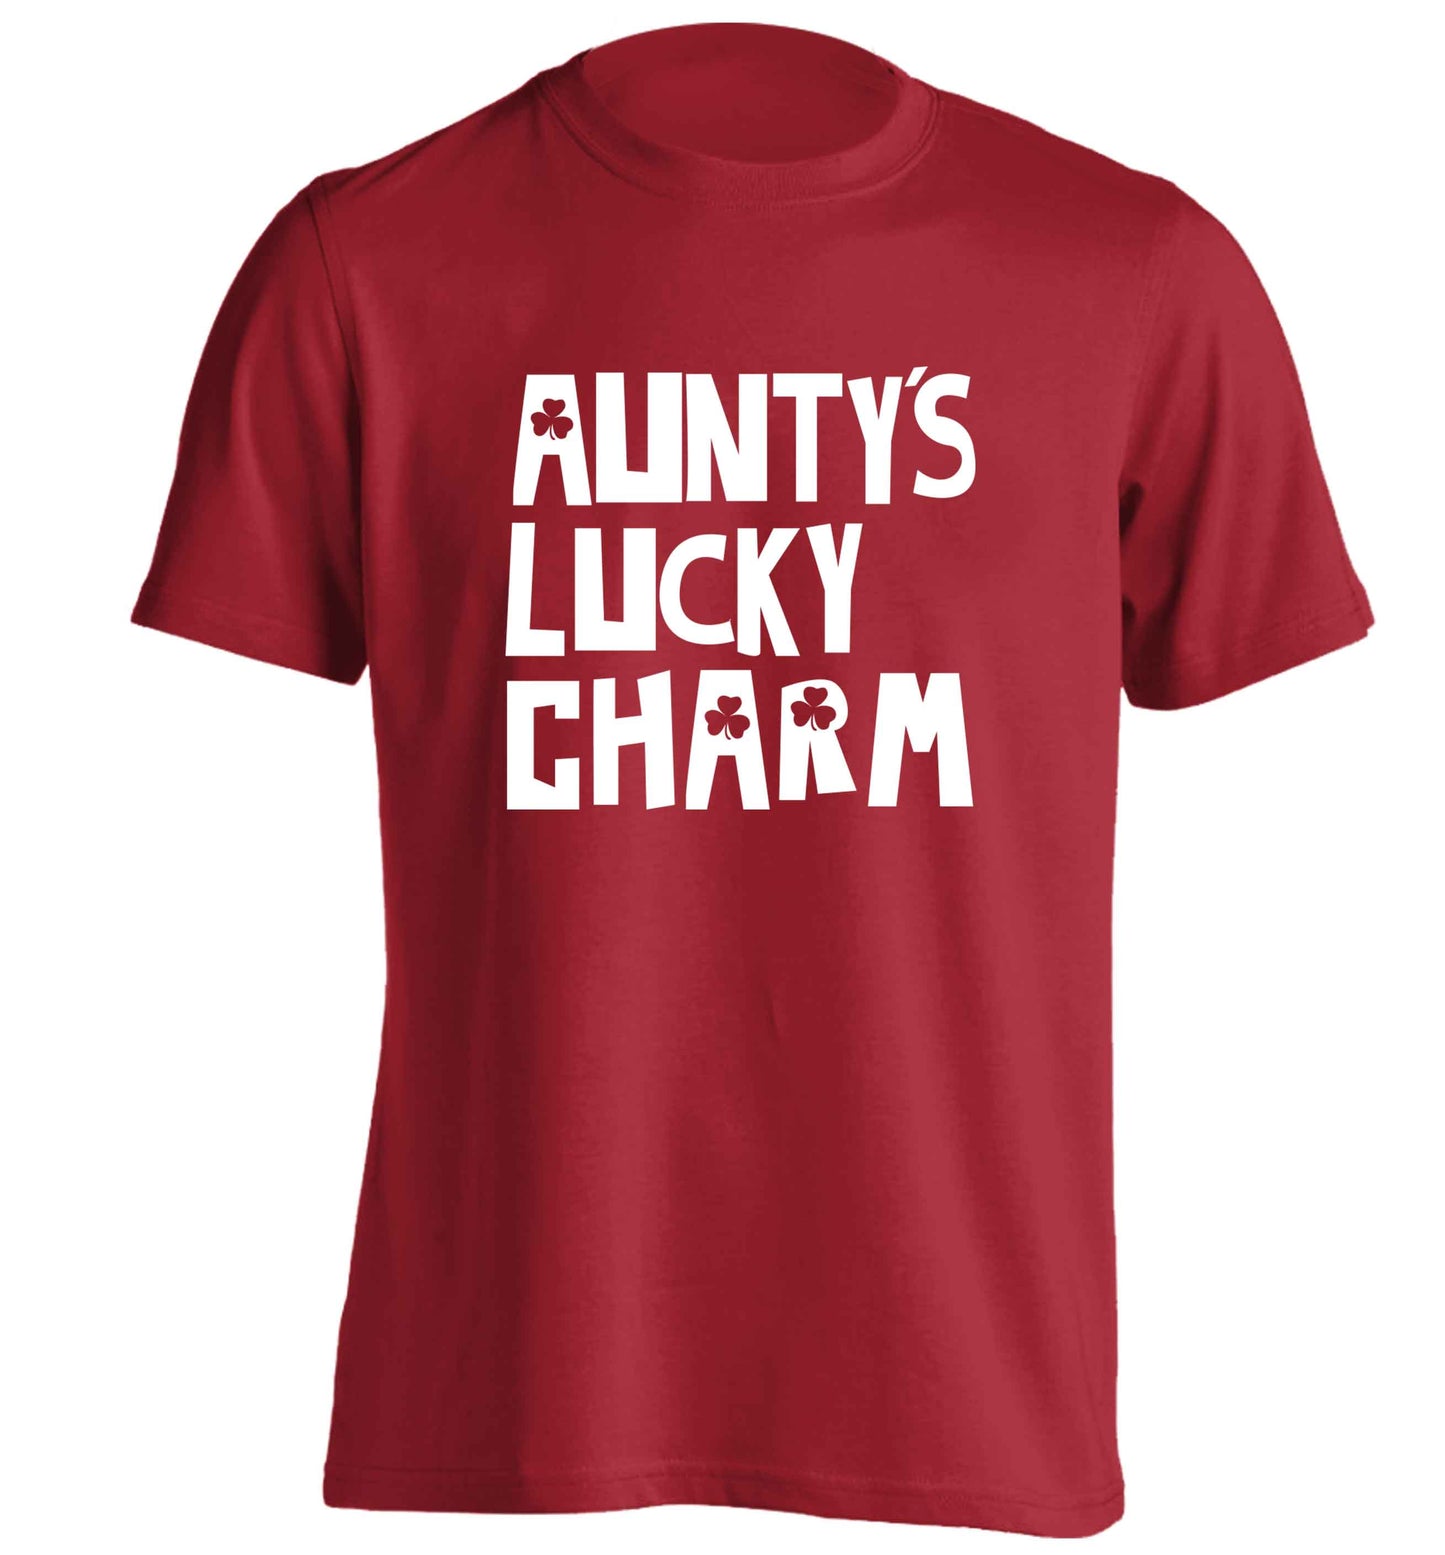 Aunty's lucky charm adults unisex red Tshirt 2XL